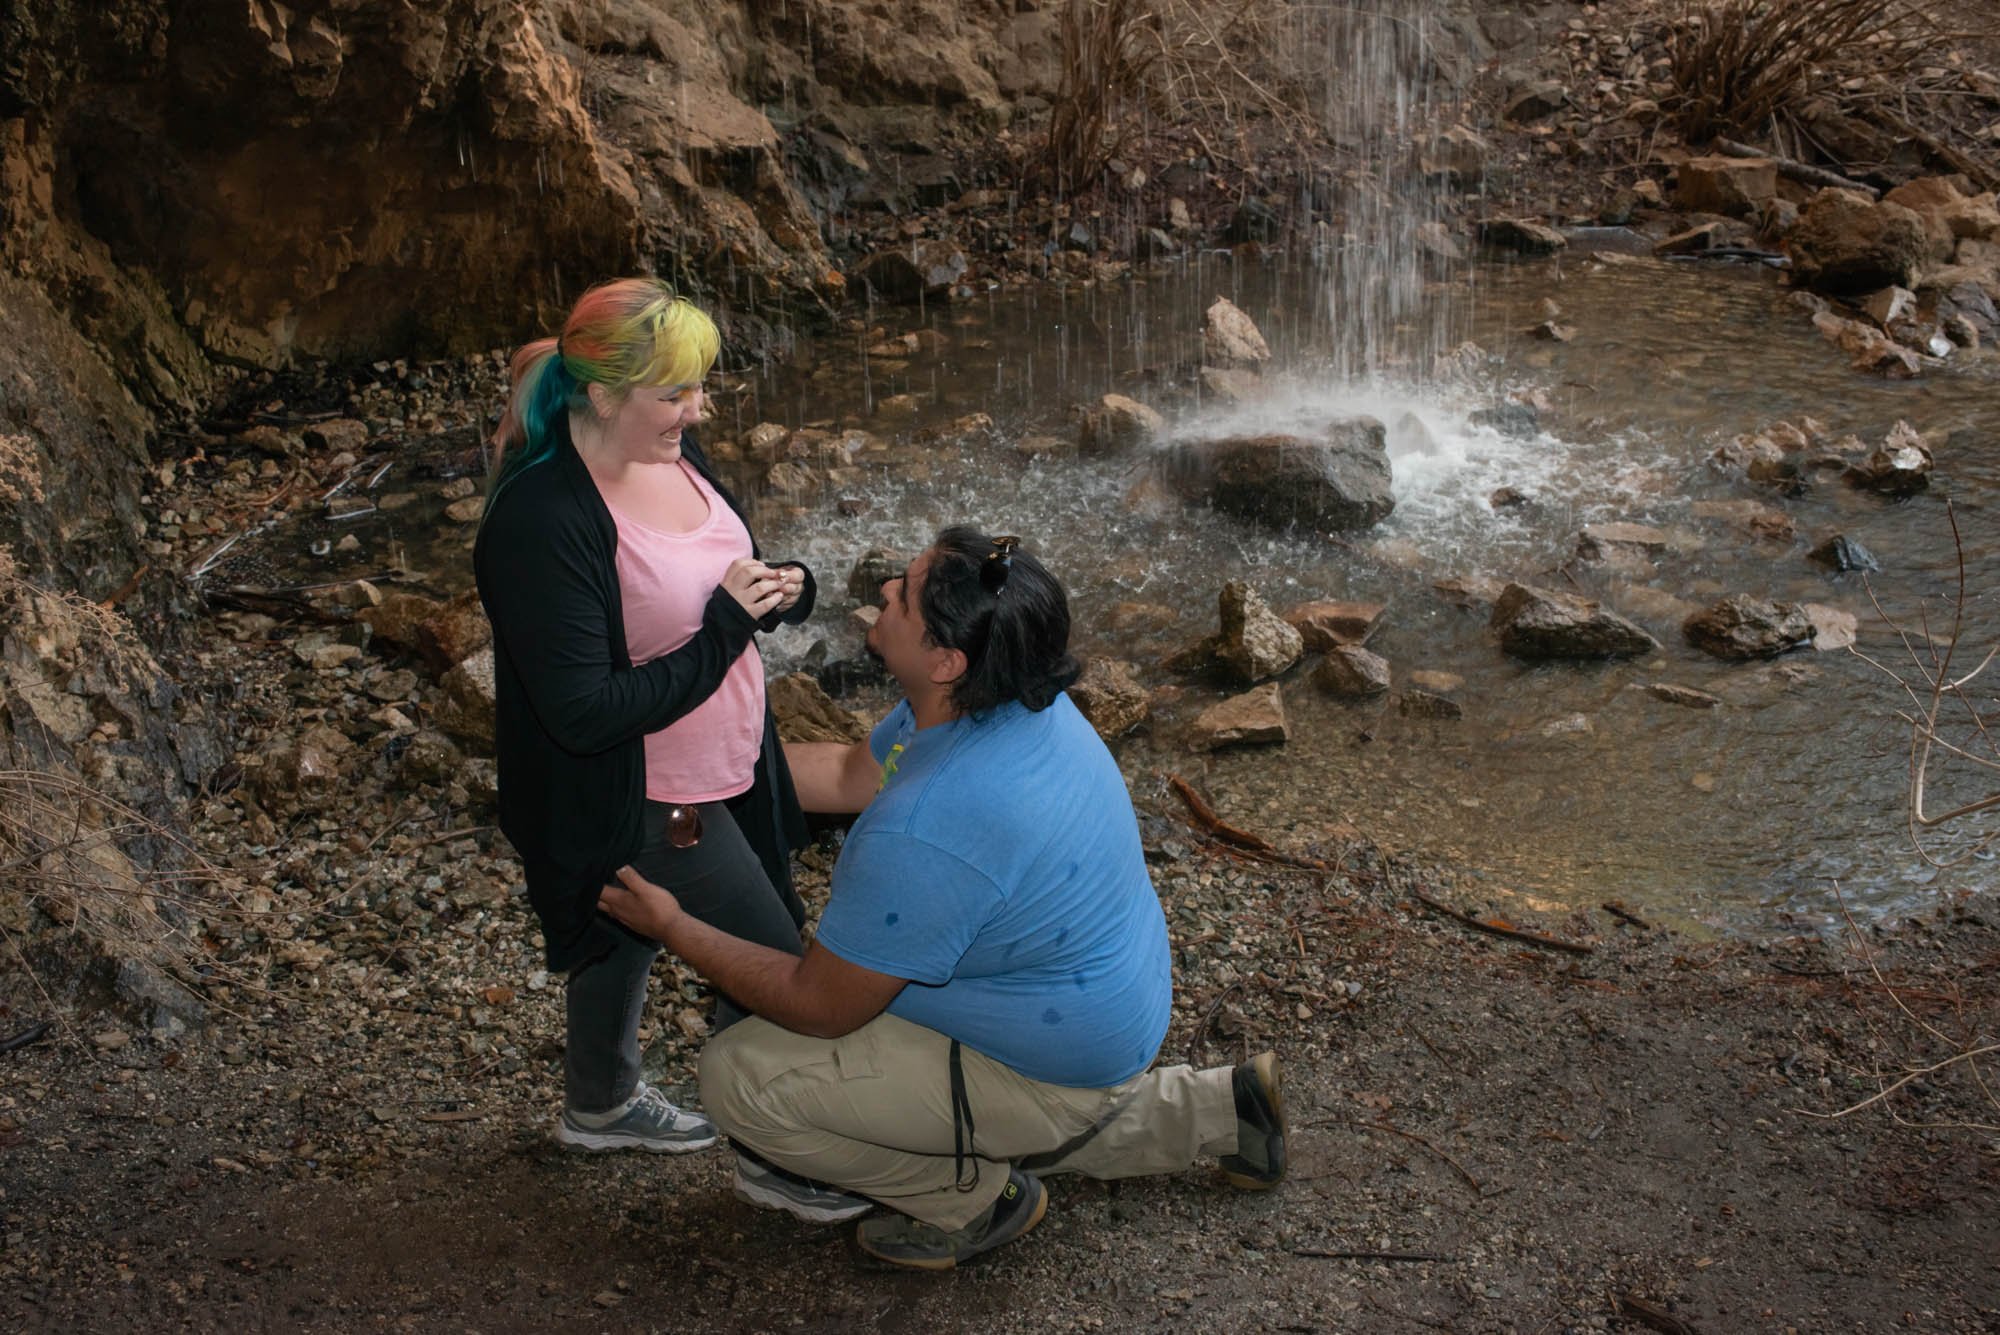   Arnold Quintana’s younger brother, Jeremy, proposes to his long-time partner under El Salto del Agua (the waterfall).  